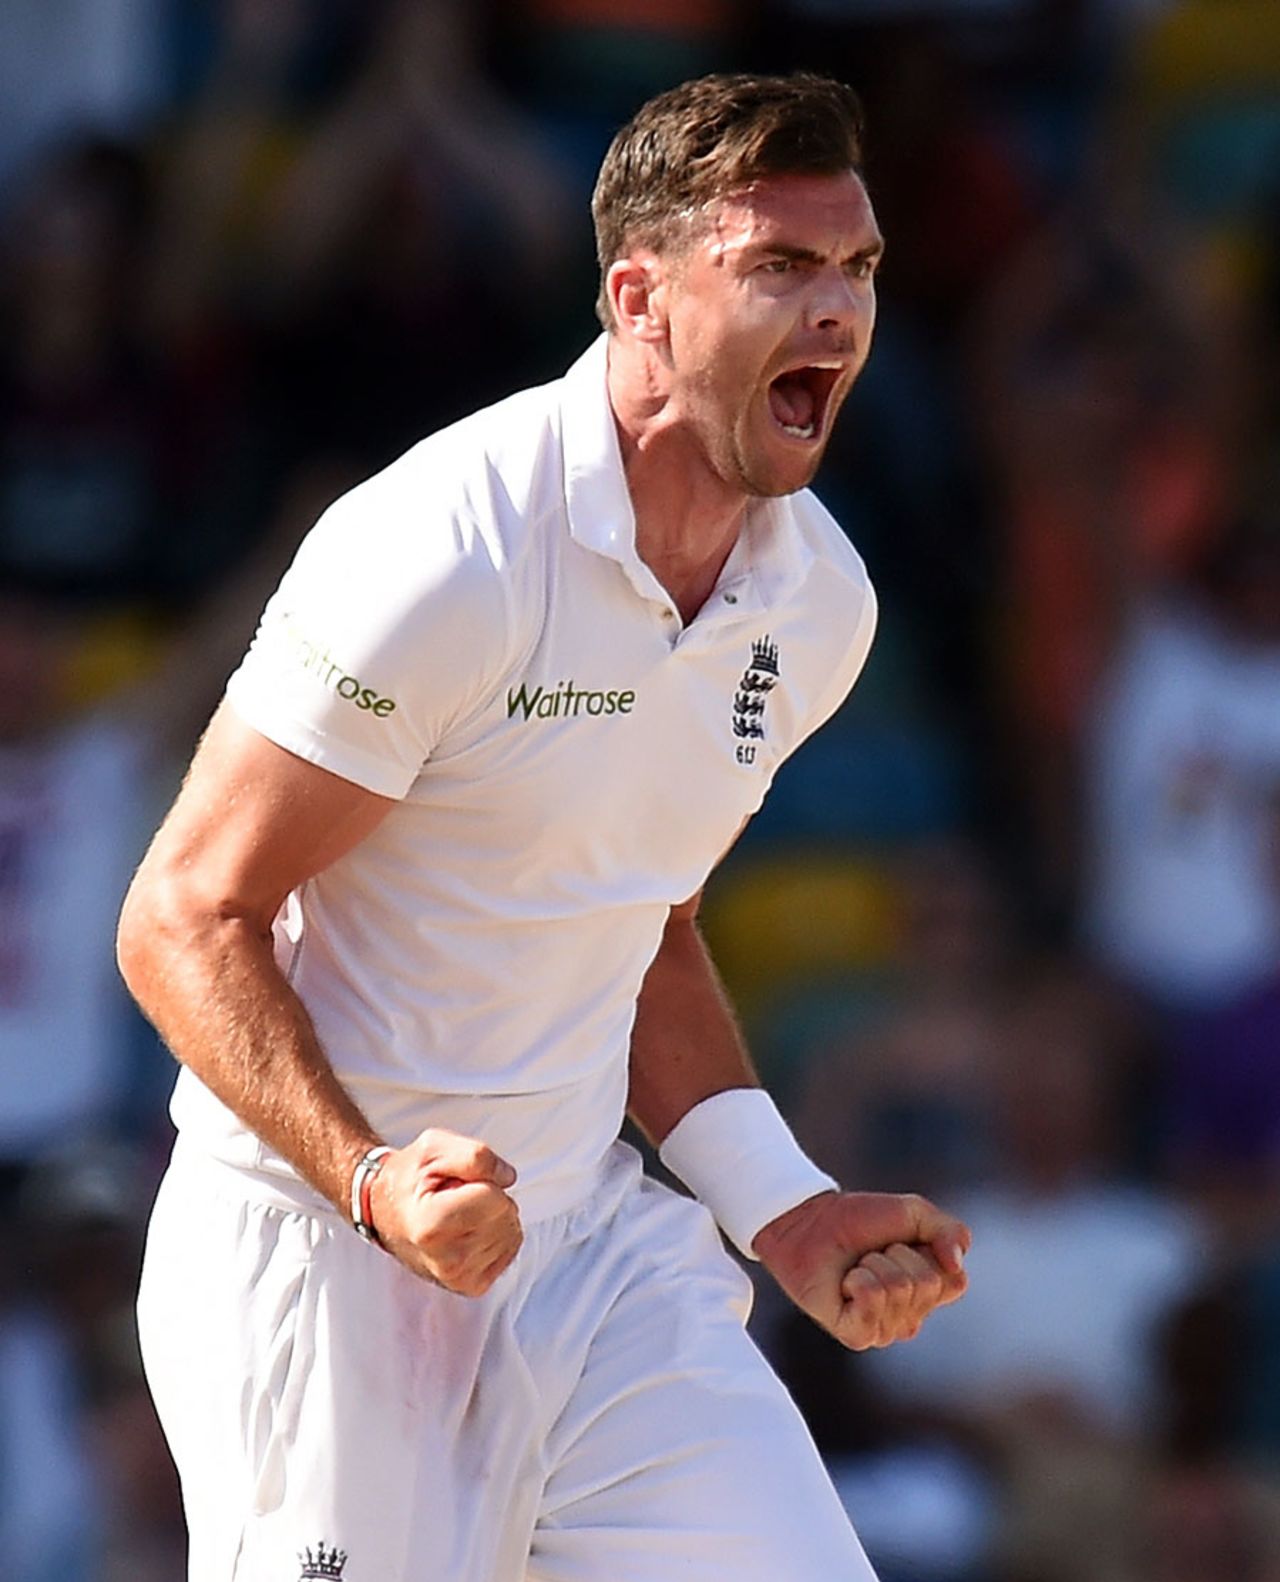 James Anderson finished with 6 for 42, West Indies v England, 3rd Test, Bridgetown, 2nd day, May 2, 2015